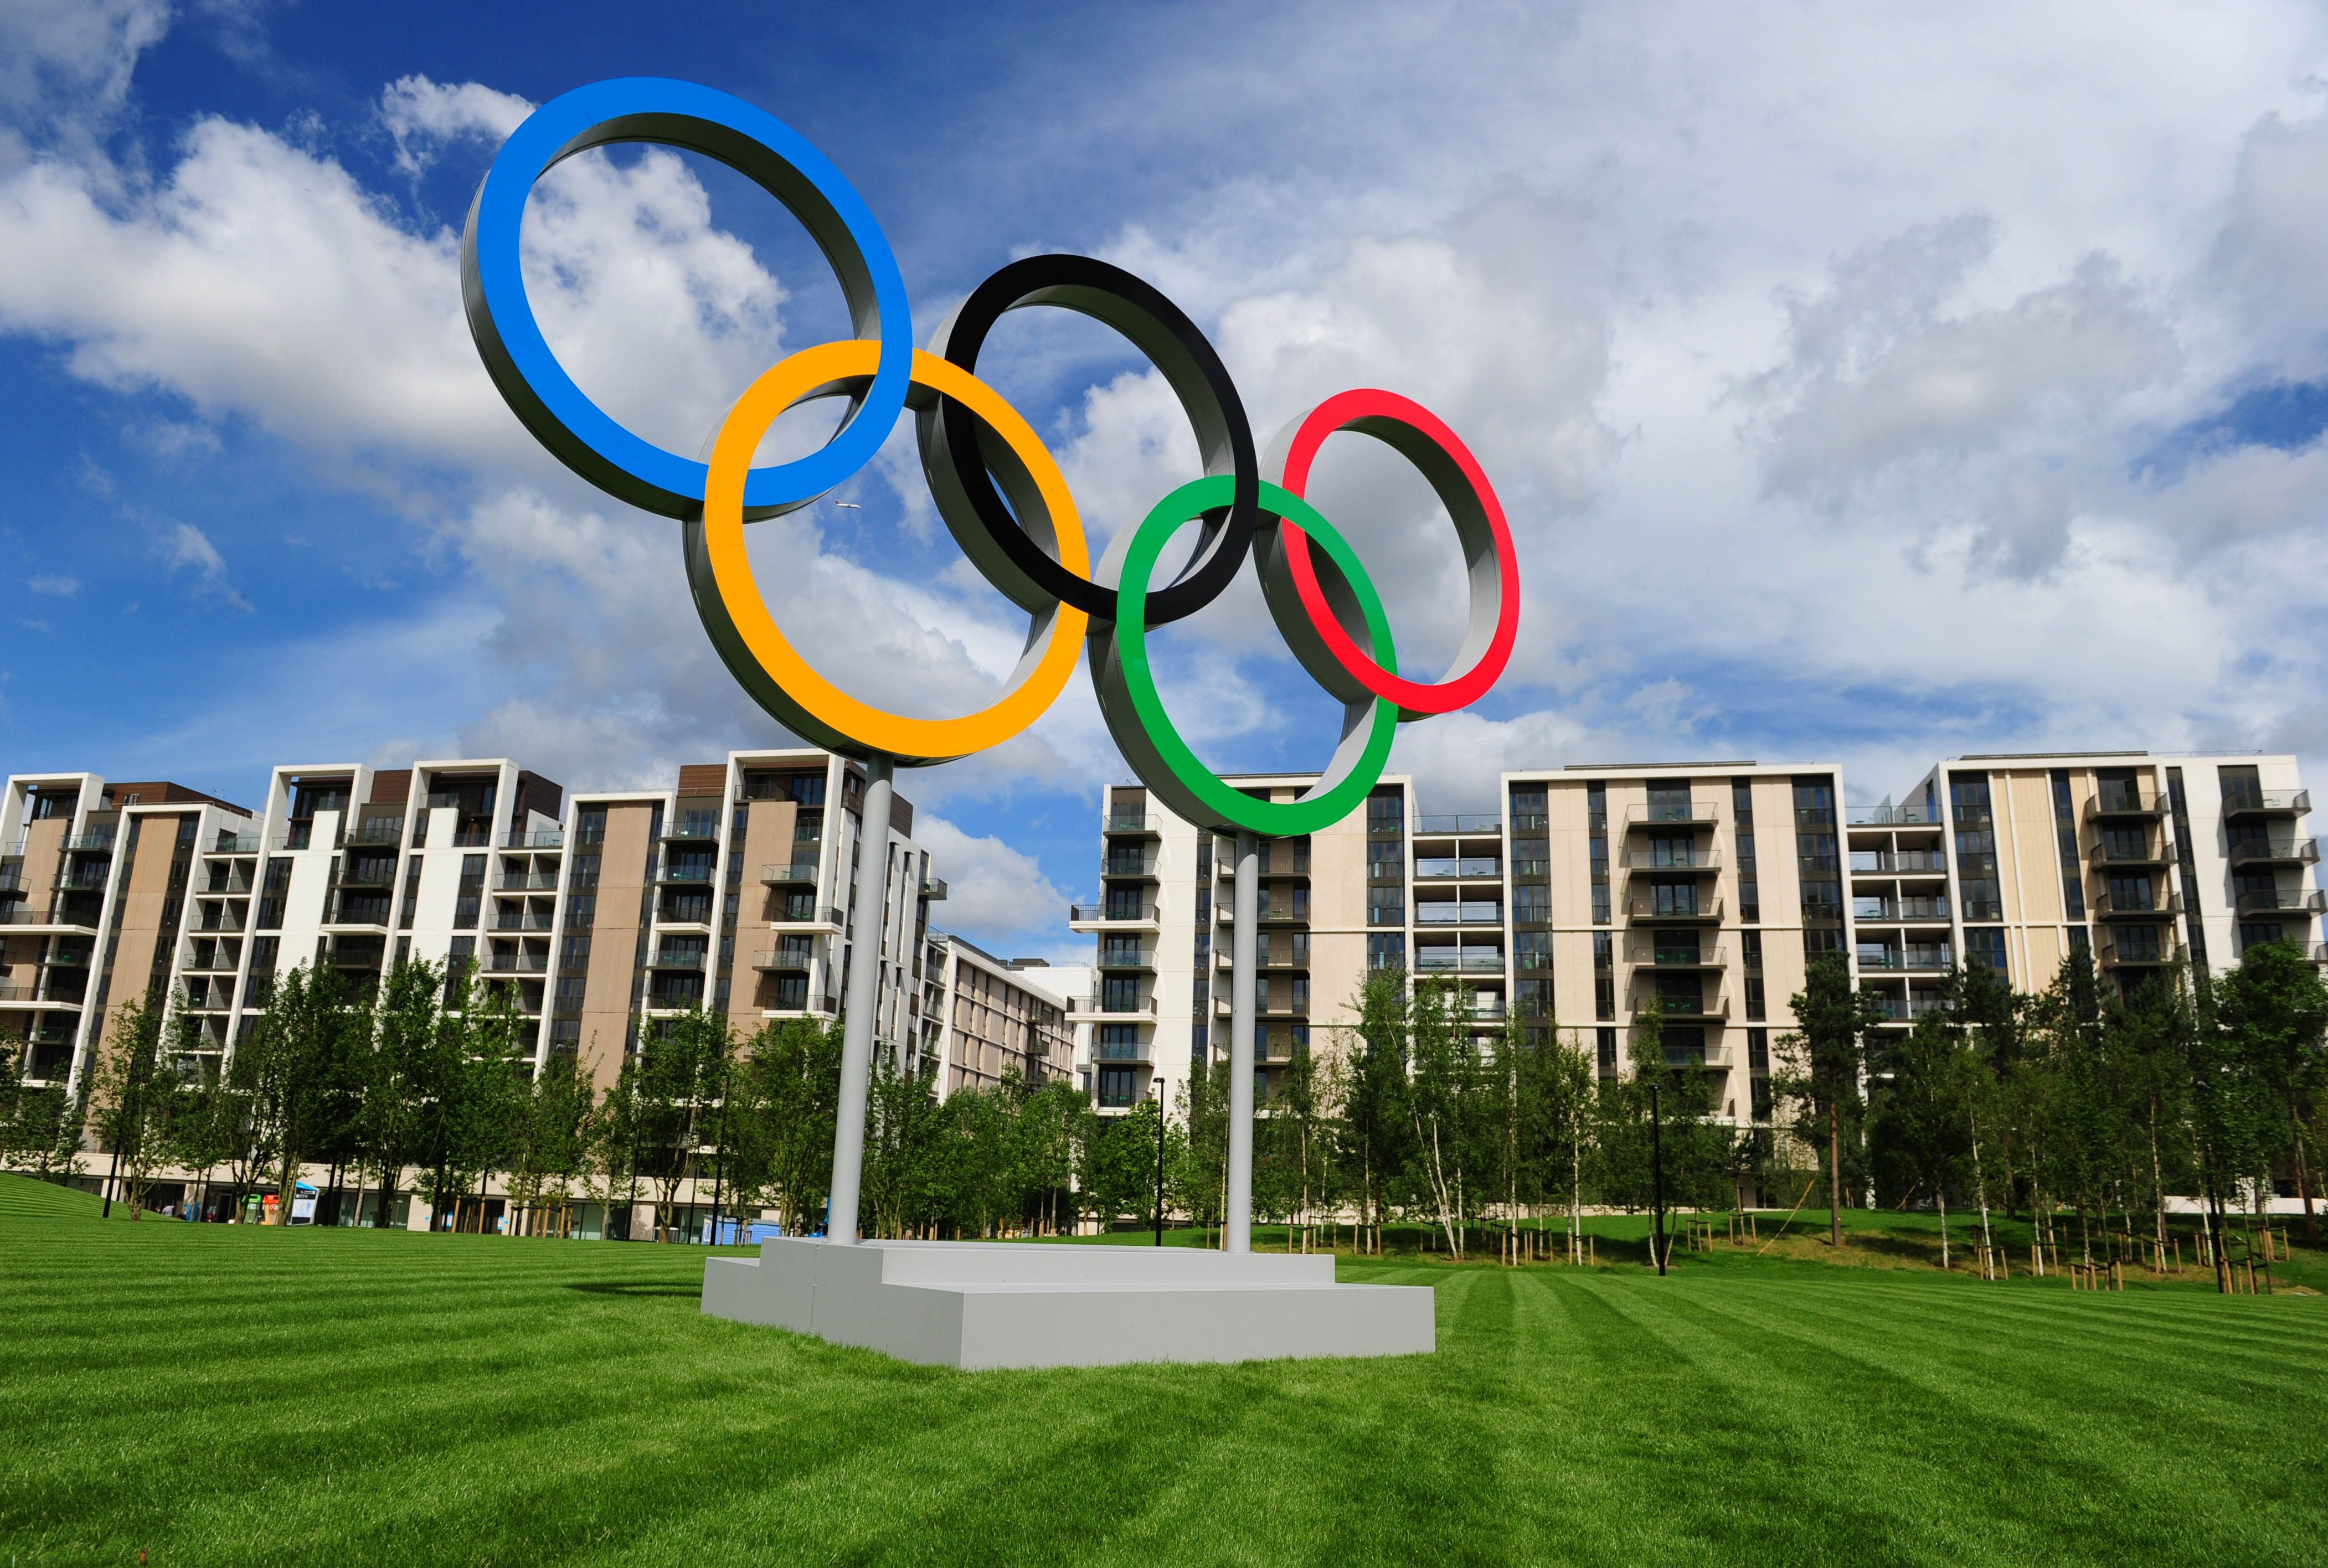 What Do The Olympic Rings Mean? - 2022 Olympics Symbols